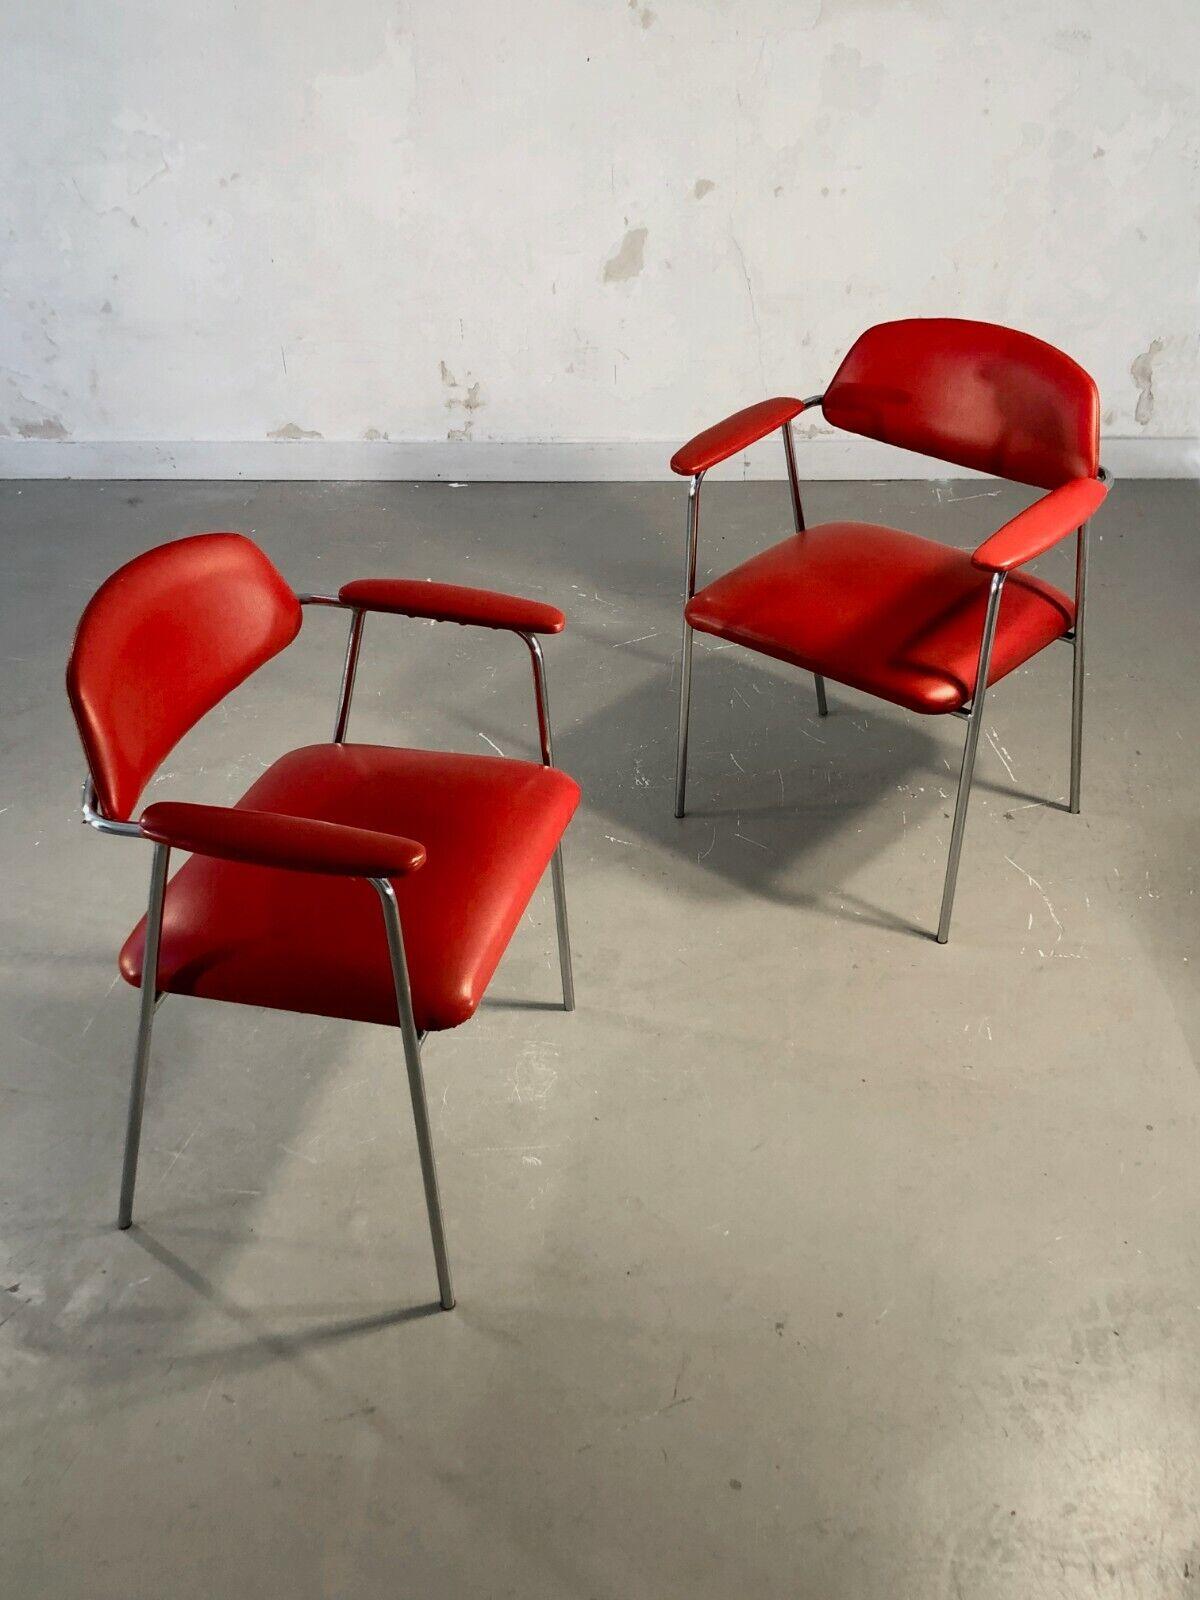 2 MID-CENTURY-MODERN MODERNIST CHAIRS by PIERRE PAULIN, STEINER, France 1950 For Sale 2